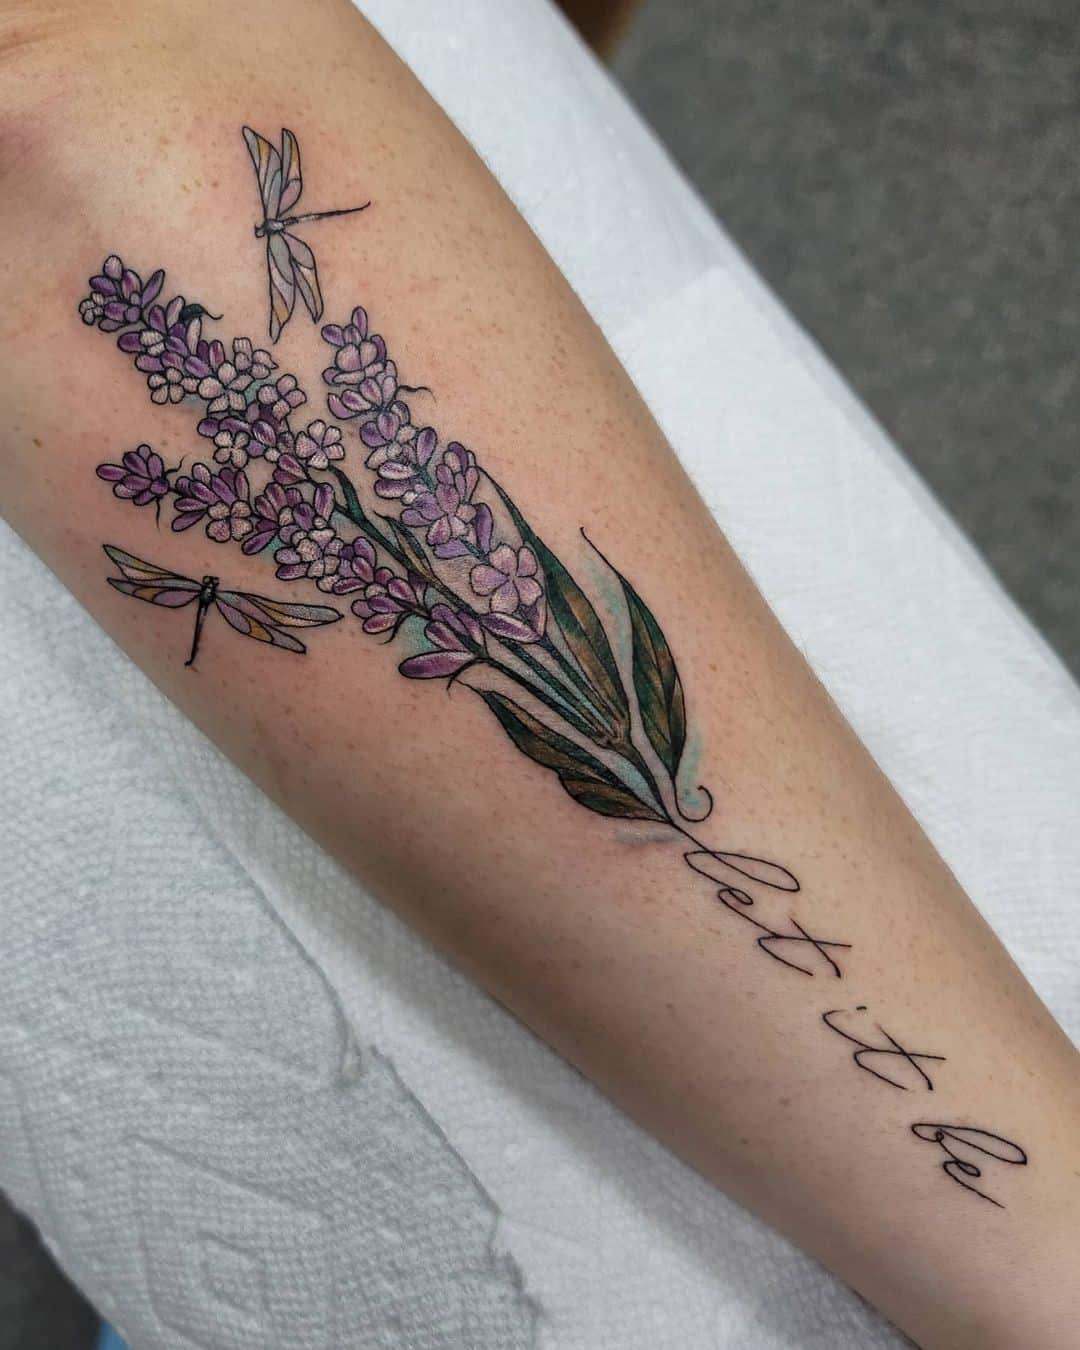 Lavender and dragonfly